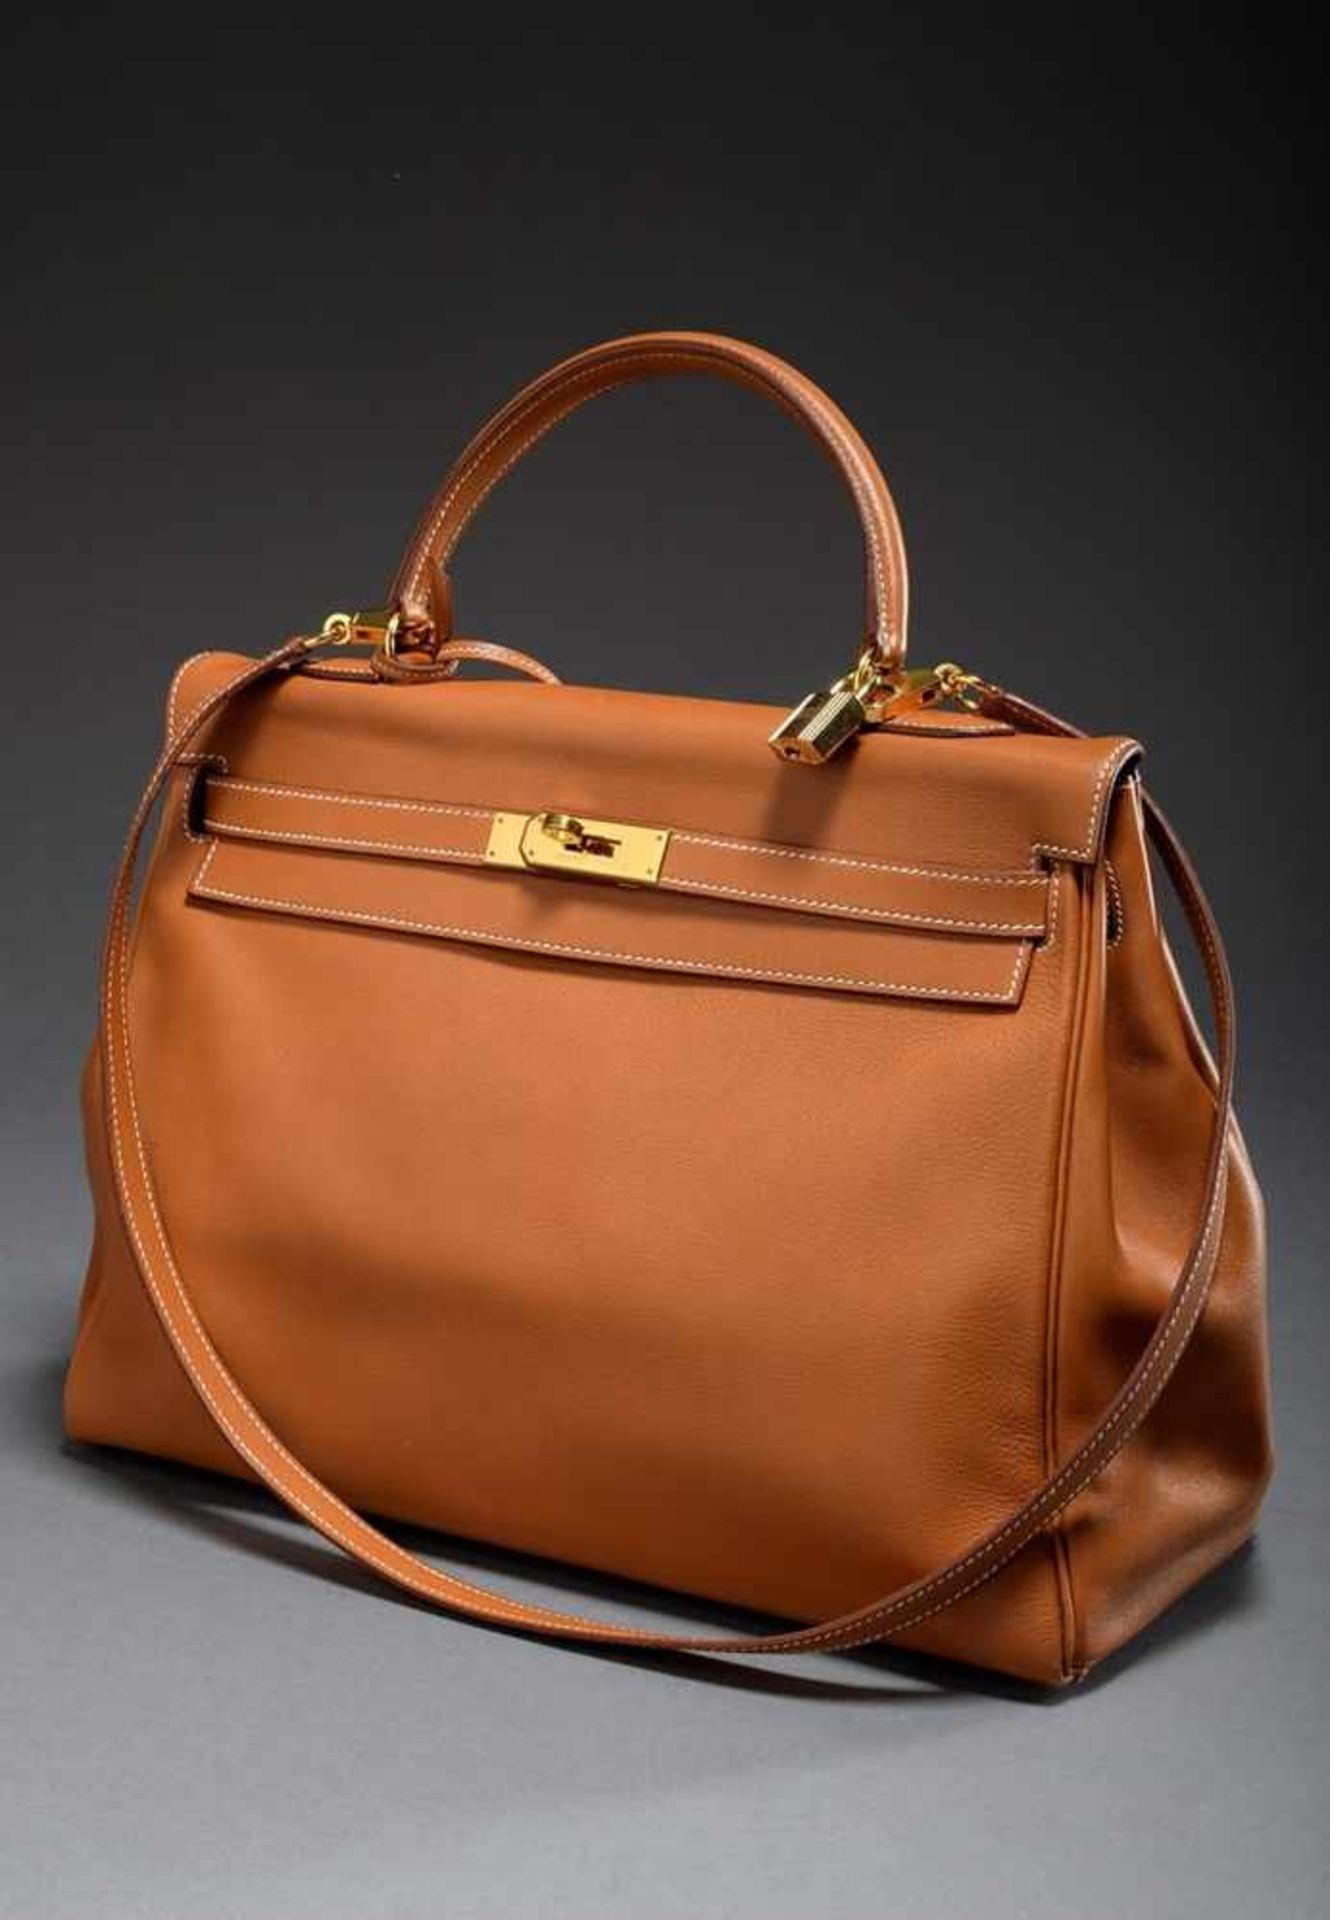 Hermès "Kelly Bag Souple 35", 1995, cognac calfskin, trapezoid body with arched carrying handle,